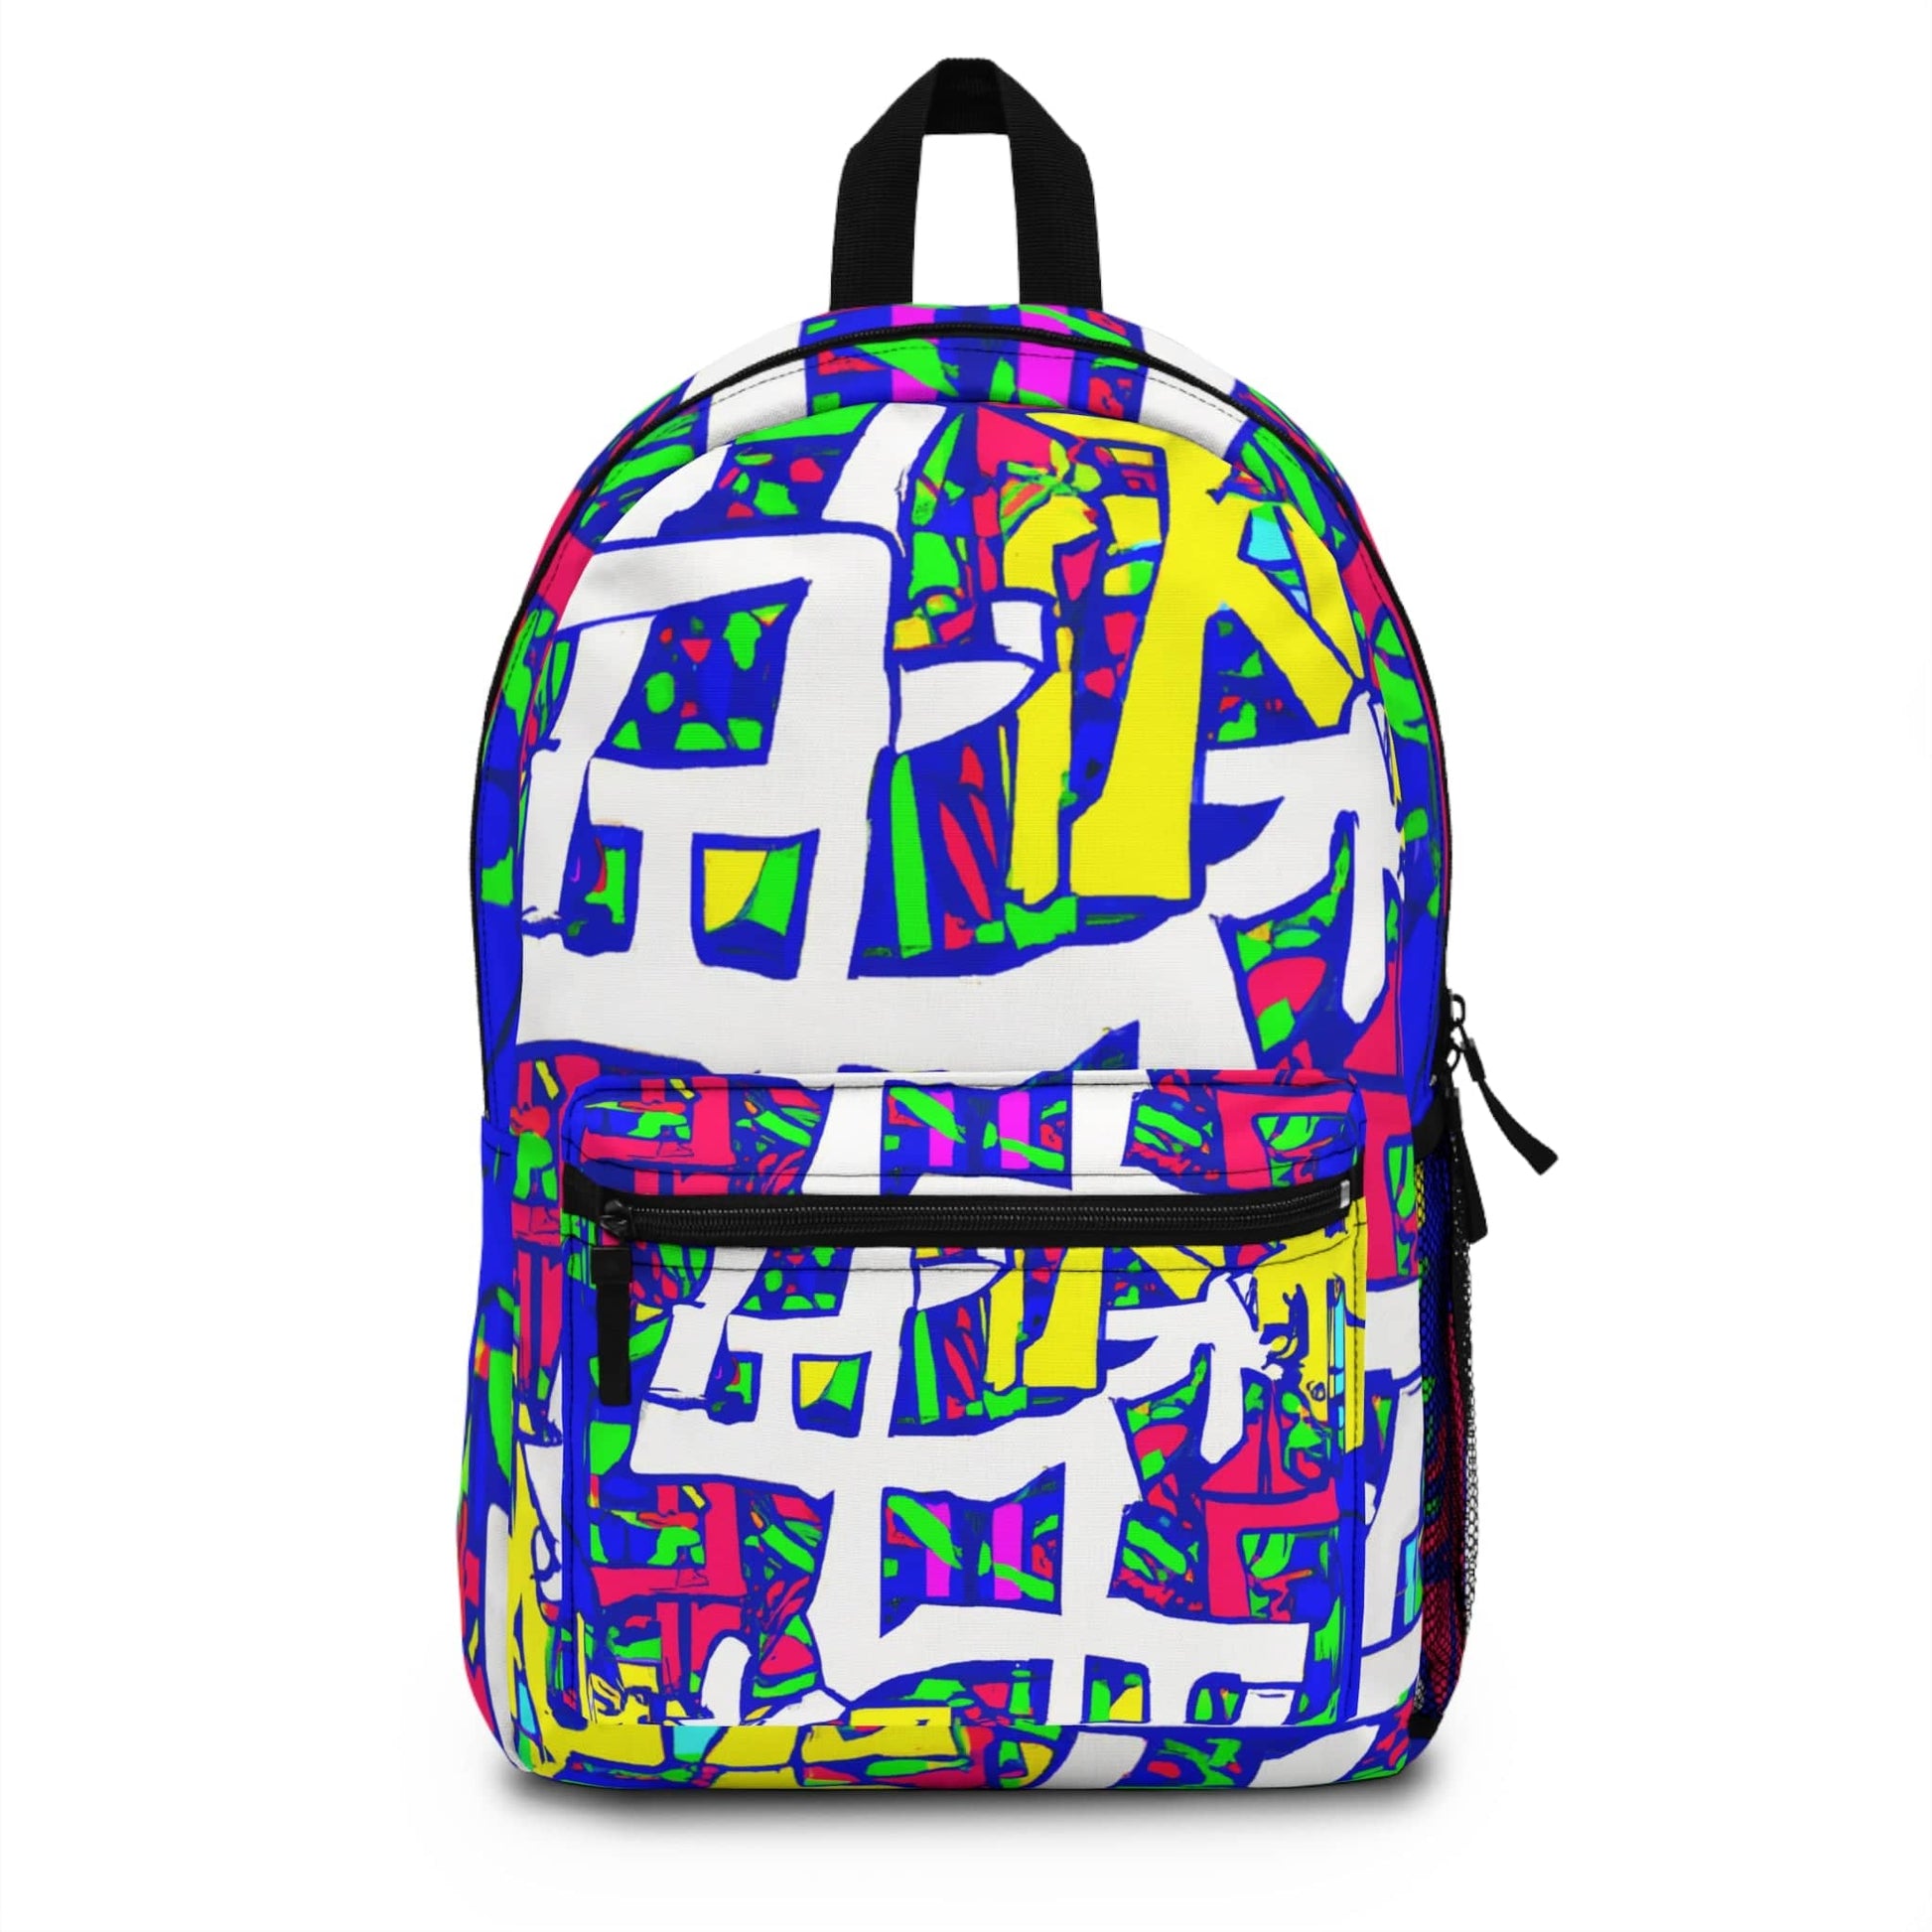 OrientalGraffiti: The Exquisite Canvas Chinese Graffiti Backpack for School, Travel, Art Lovers, and Trendsetters Bags Bigger Than Life   